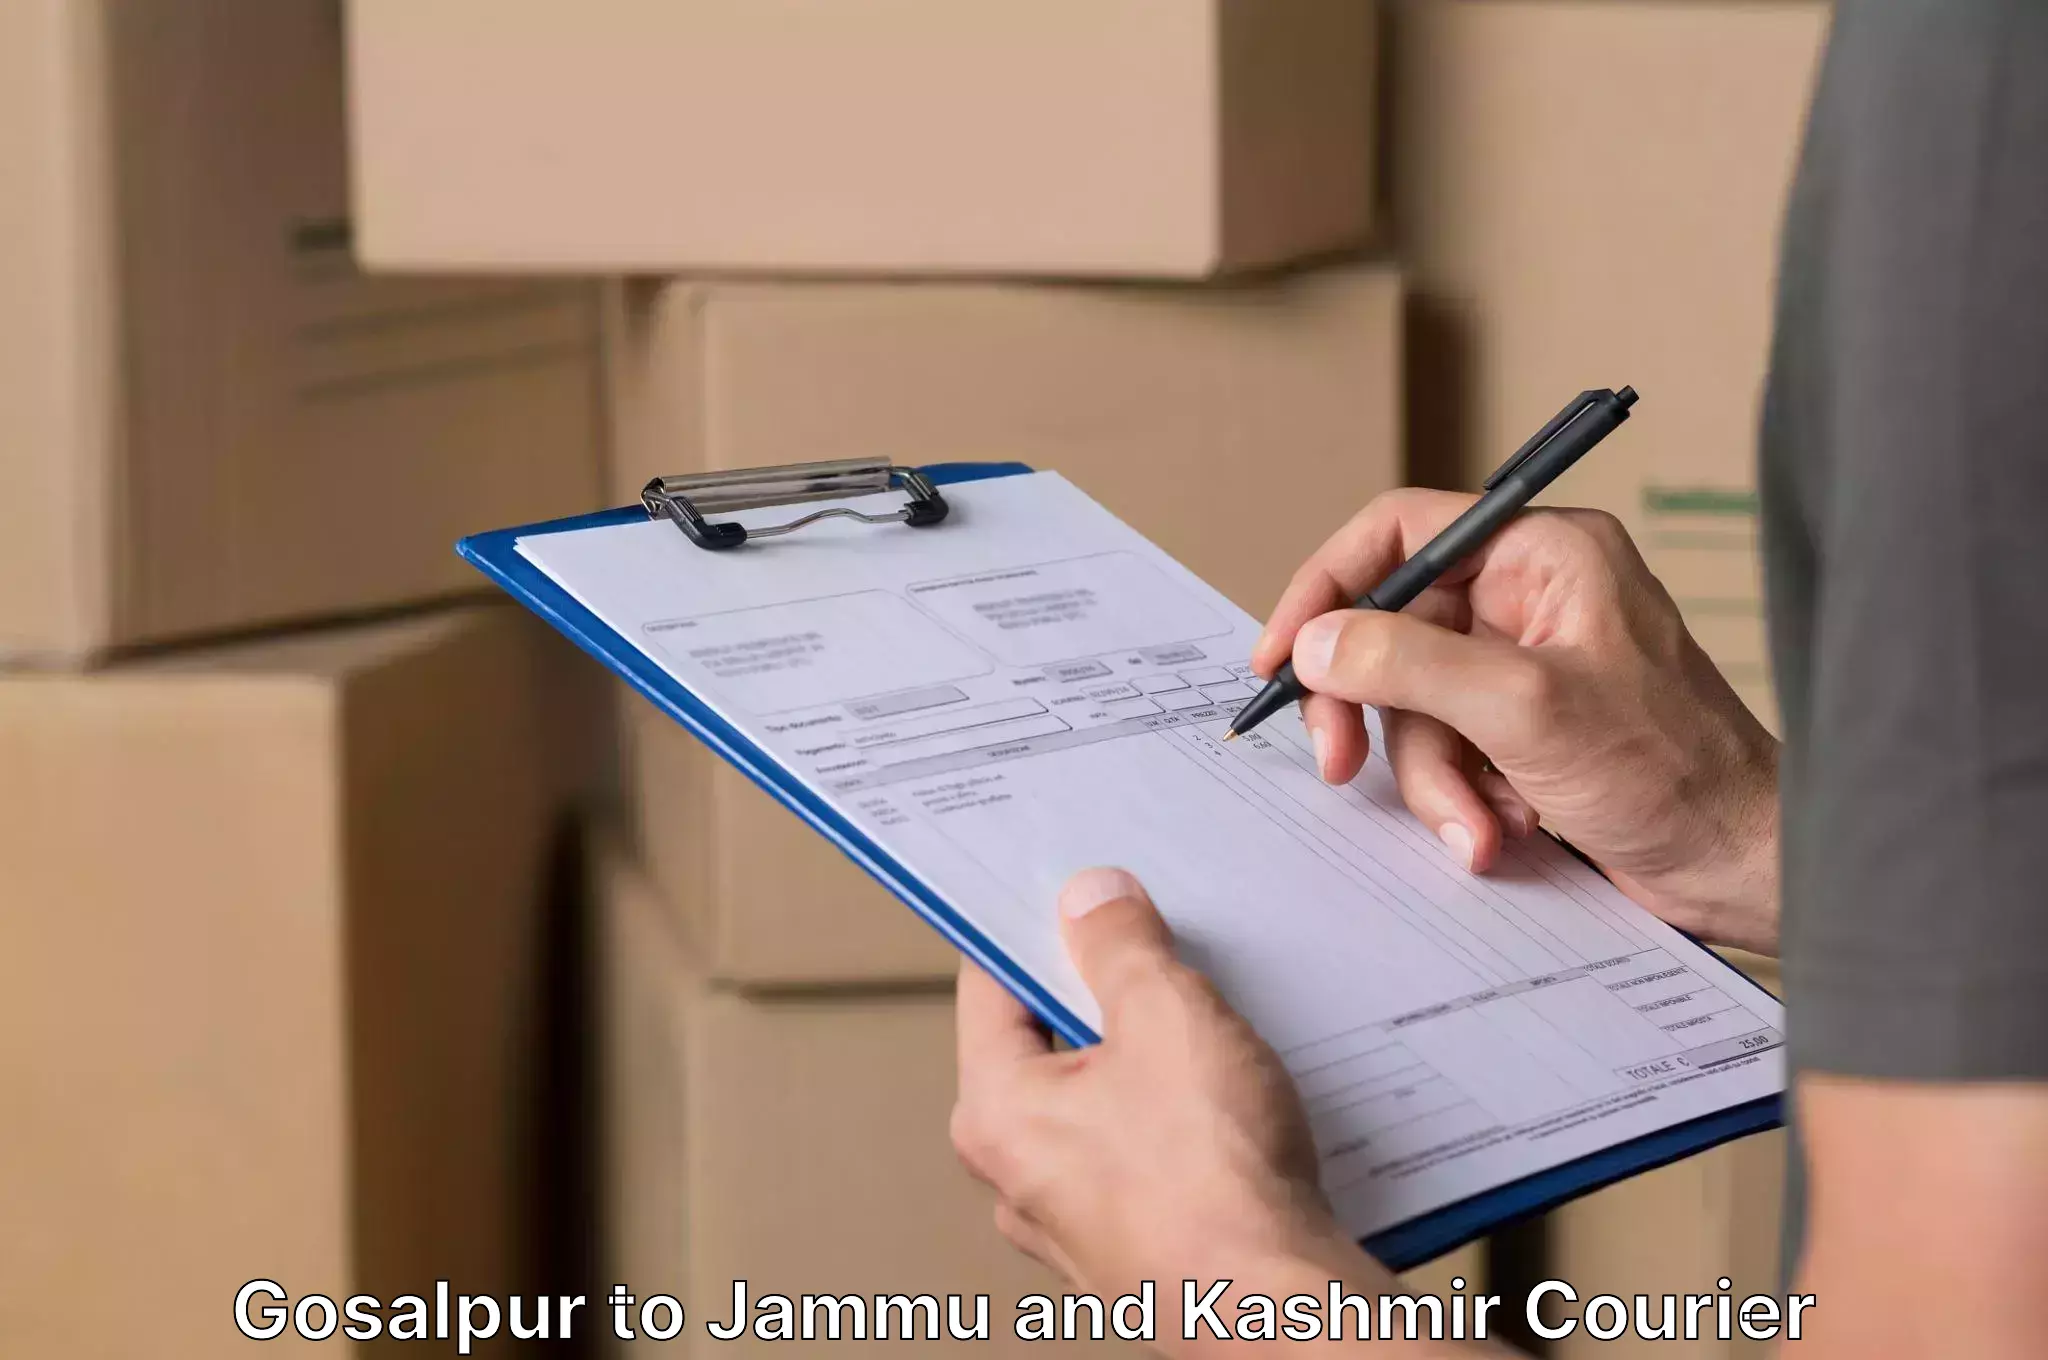 Quality moving and storage in Gosalpur to Baramulla